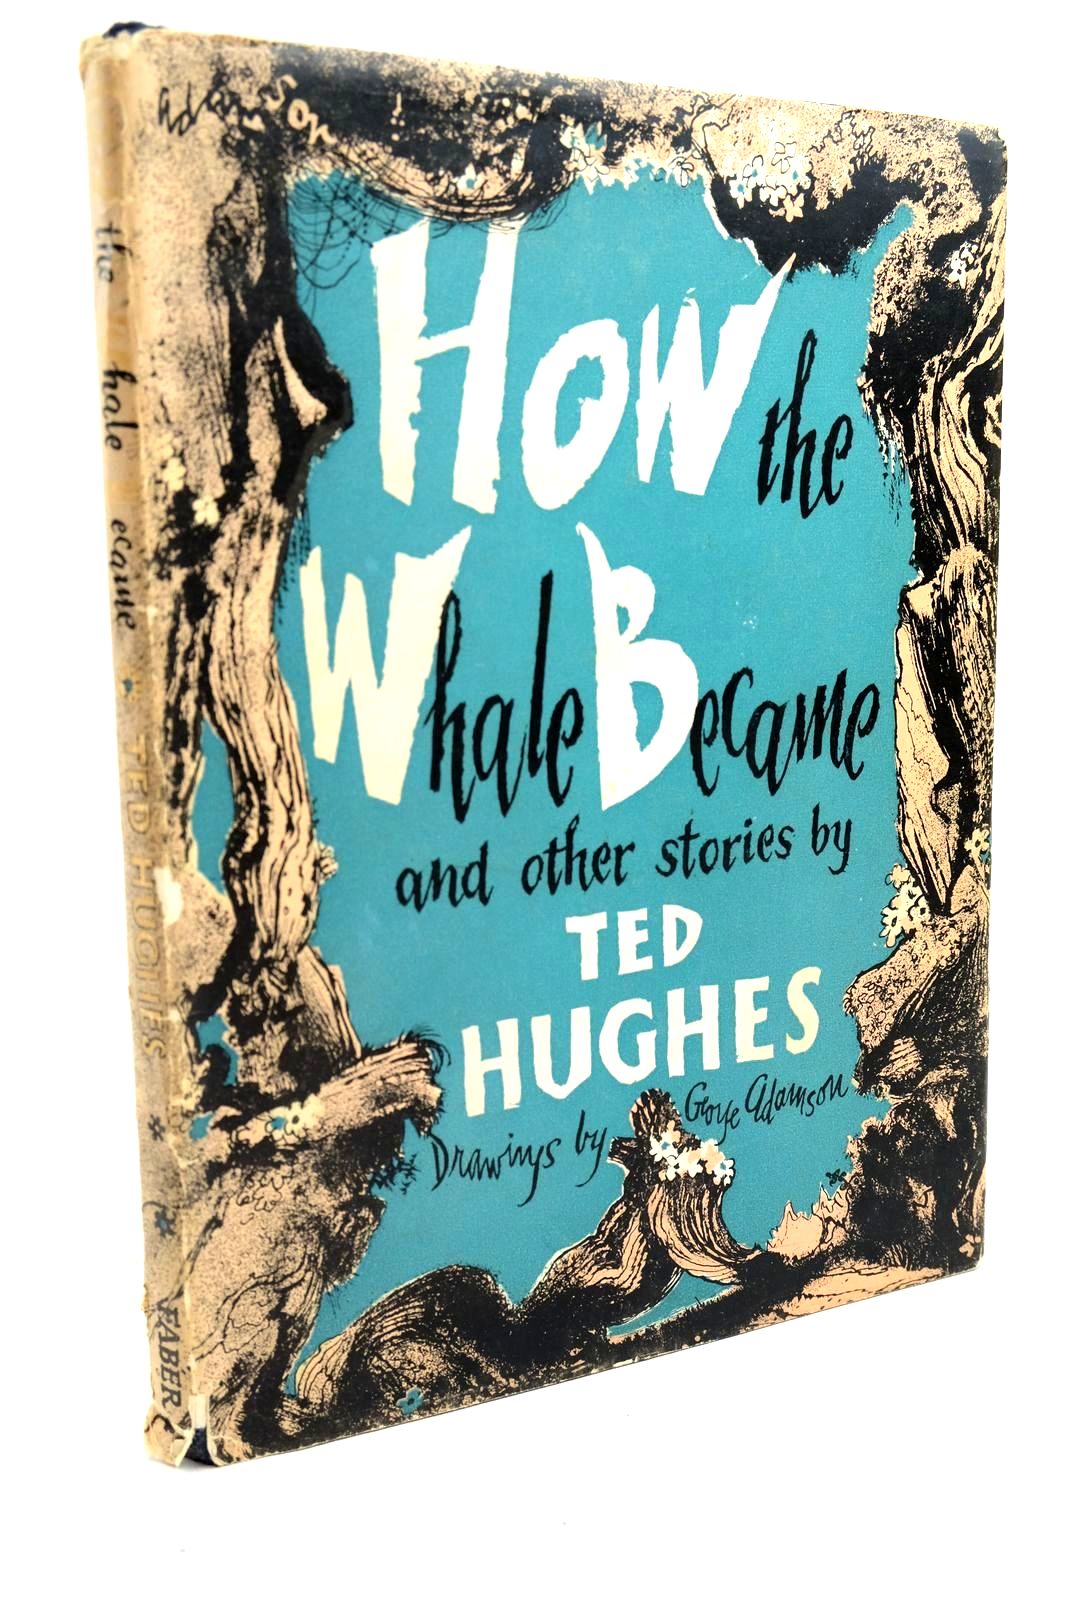 Photo of HOW THE WHALE BECAME written by Hughes, Ted illustrated by Adamson, George published by Faber &amp; Faber Ltd. (STOCK CODE: 1321607)  for sale by Stella & Rose's Books